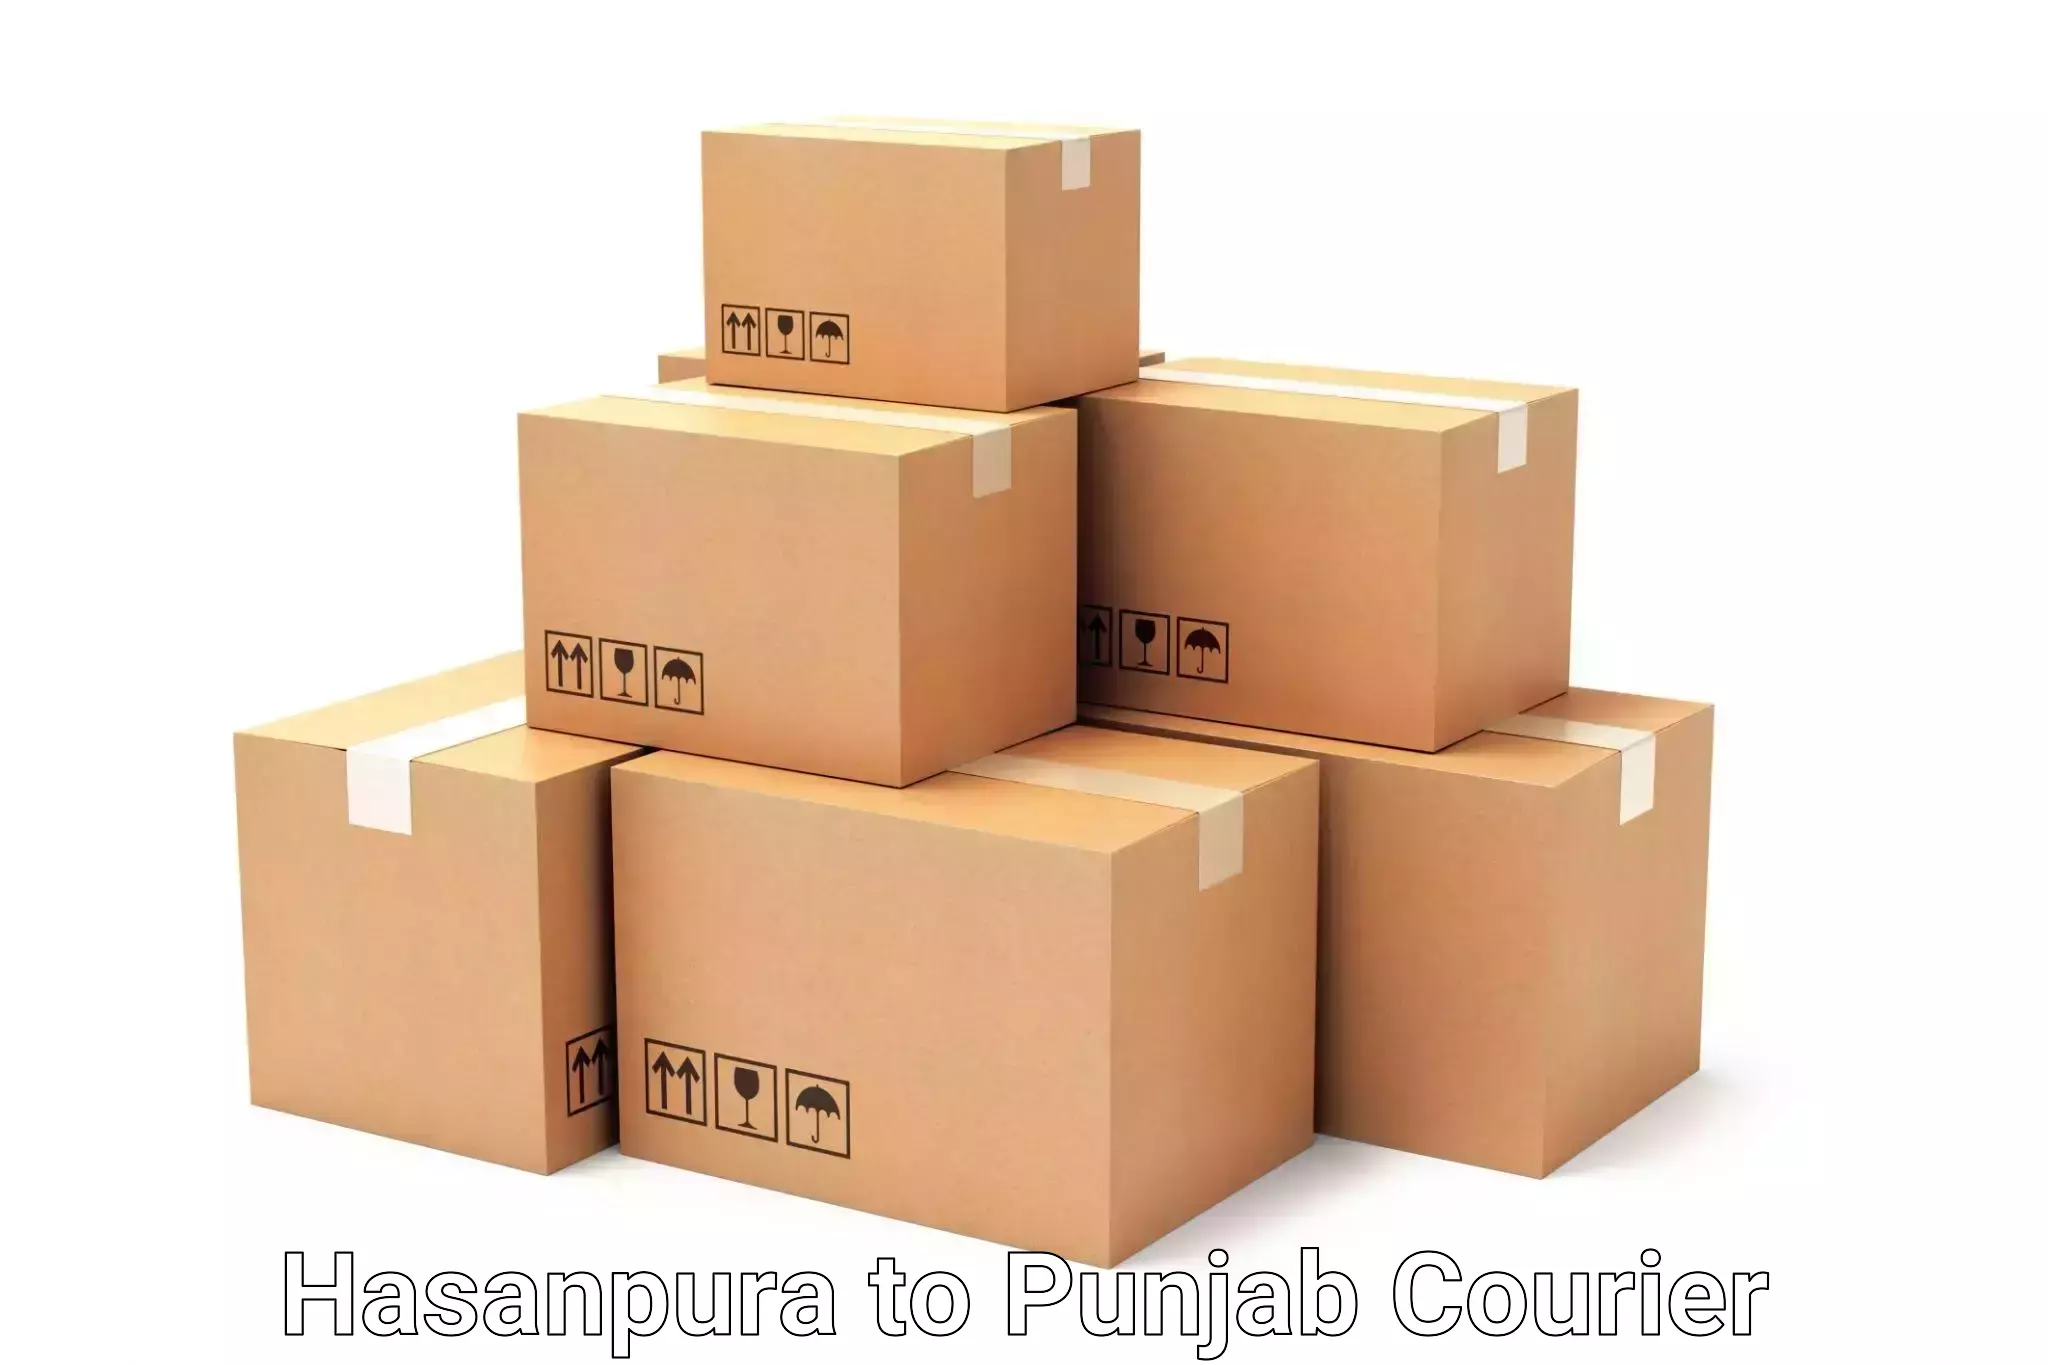 Luggage transport consulting Hasanpura to Punjab Agricultural University Ludhiana